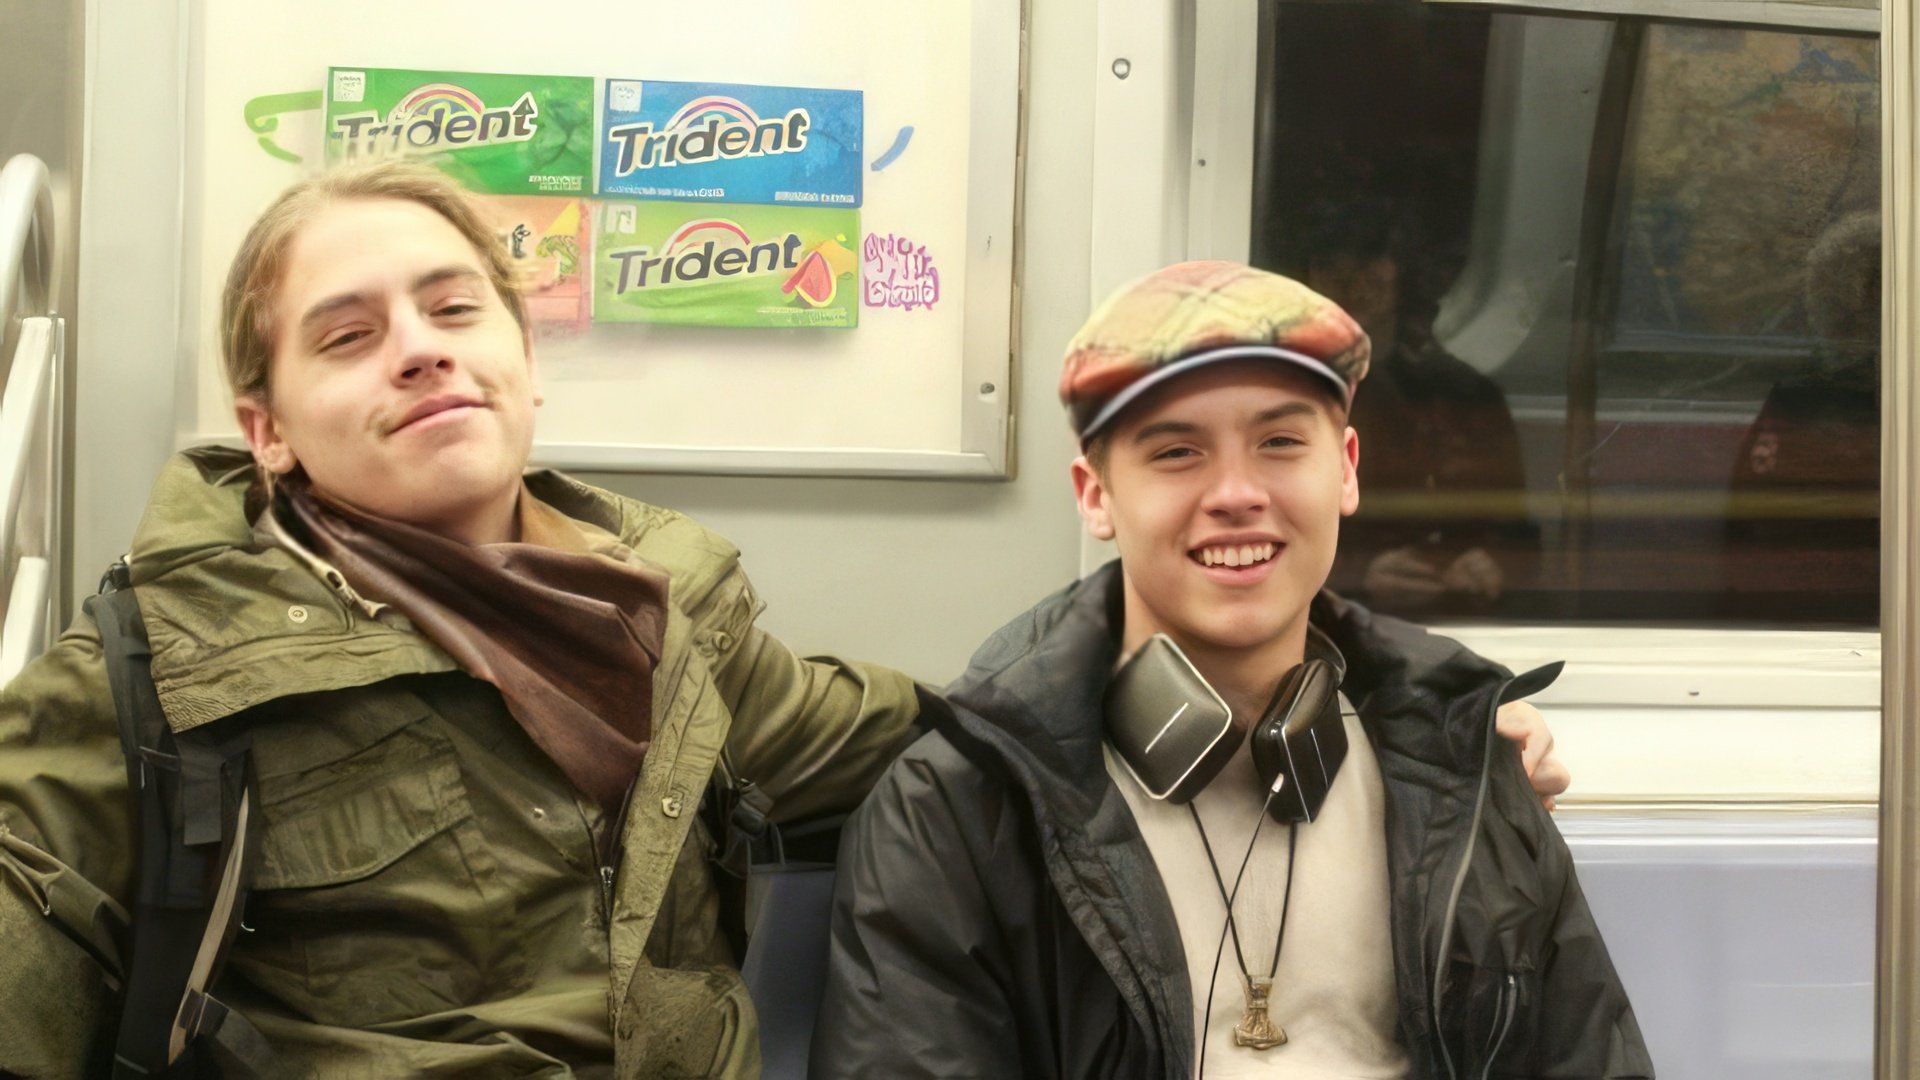 Sprouse Brothers in the New York subway